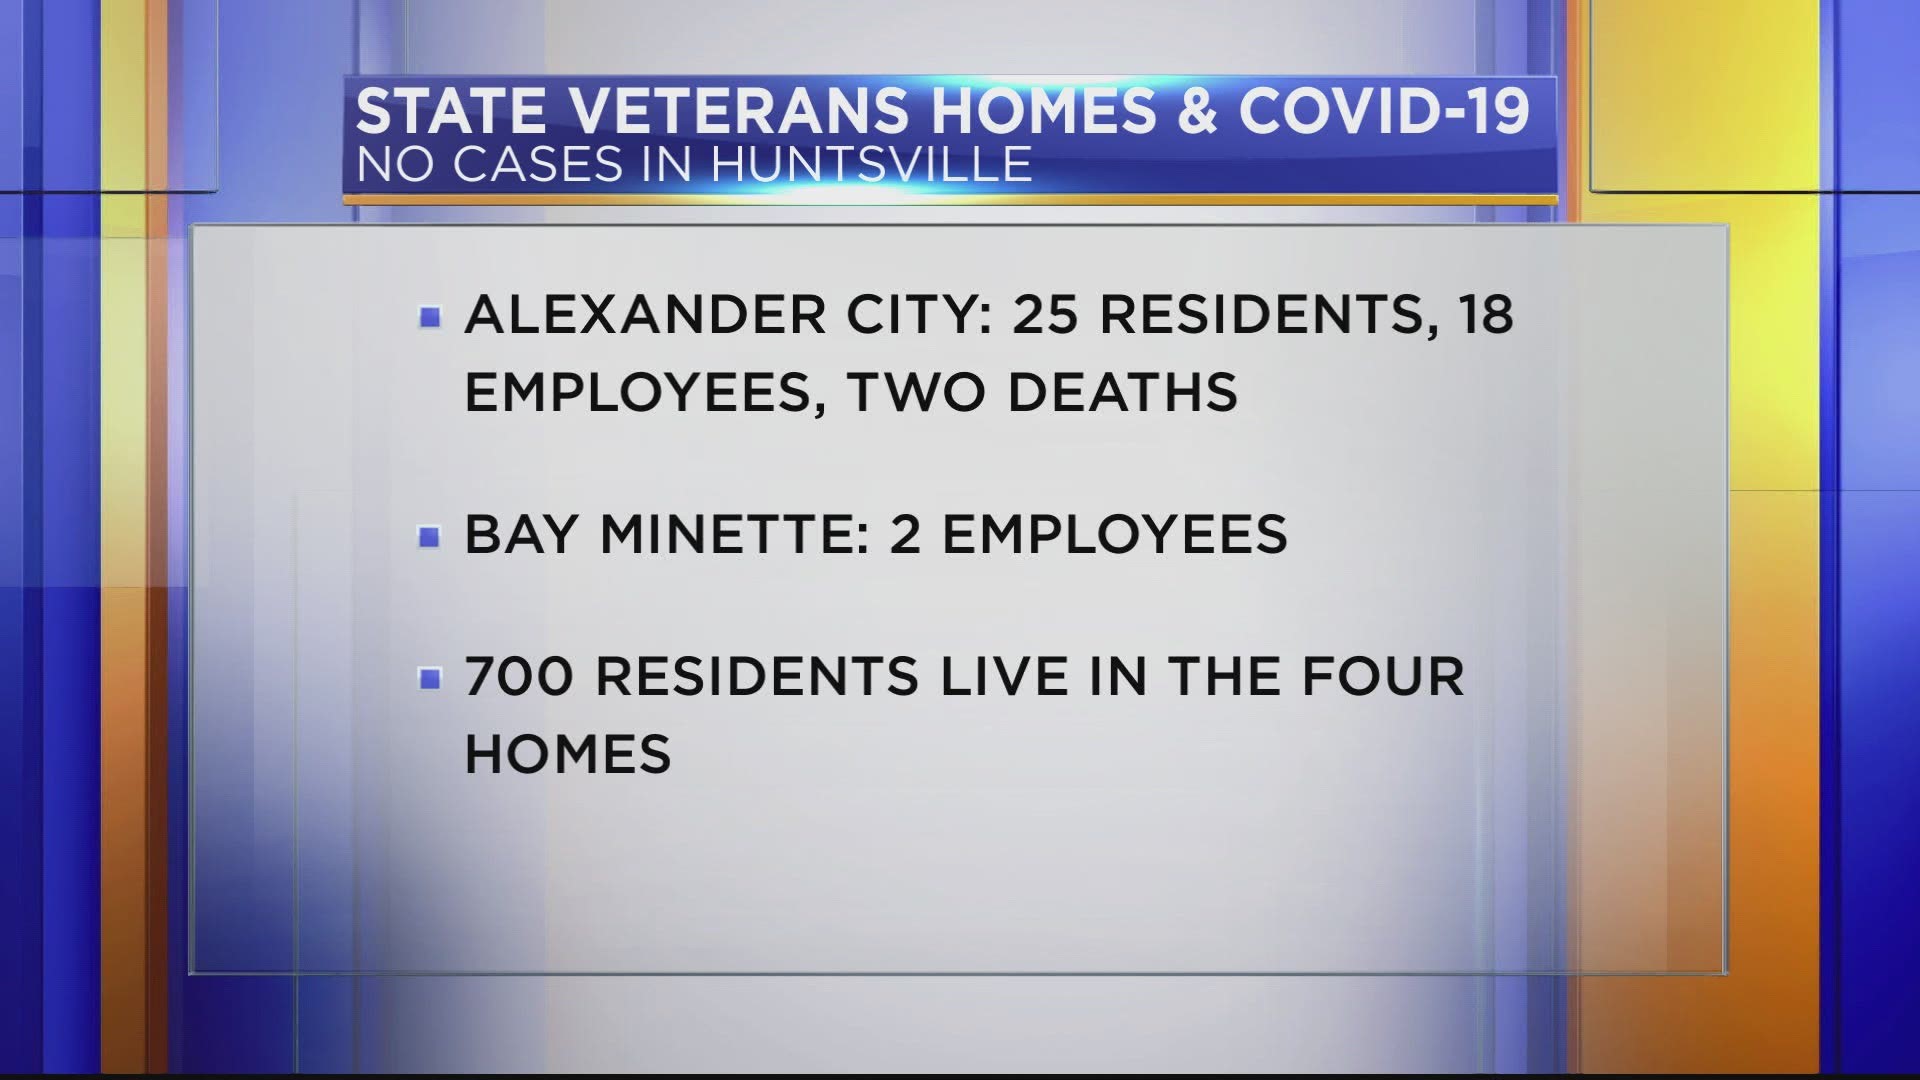 So far, there have been no reported positive cases of the virus at the Huntsville and Pell City state veterans homes.